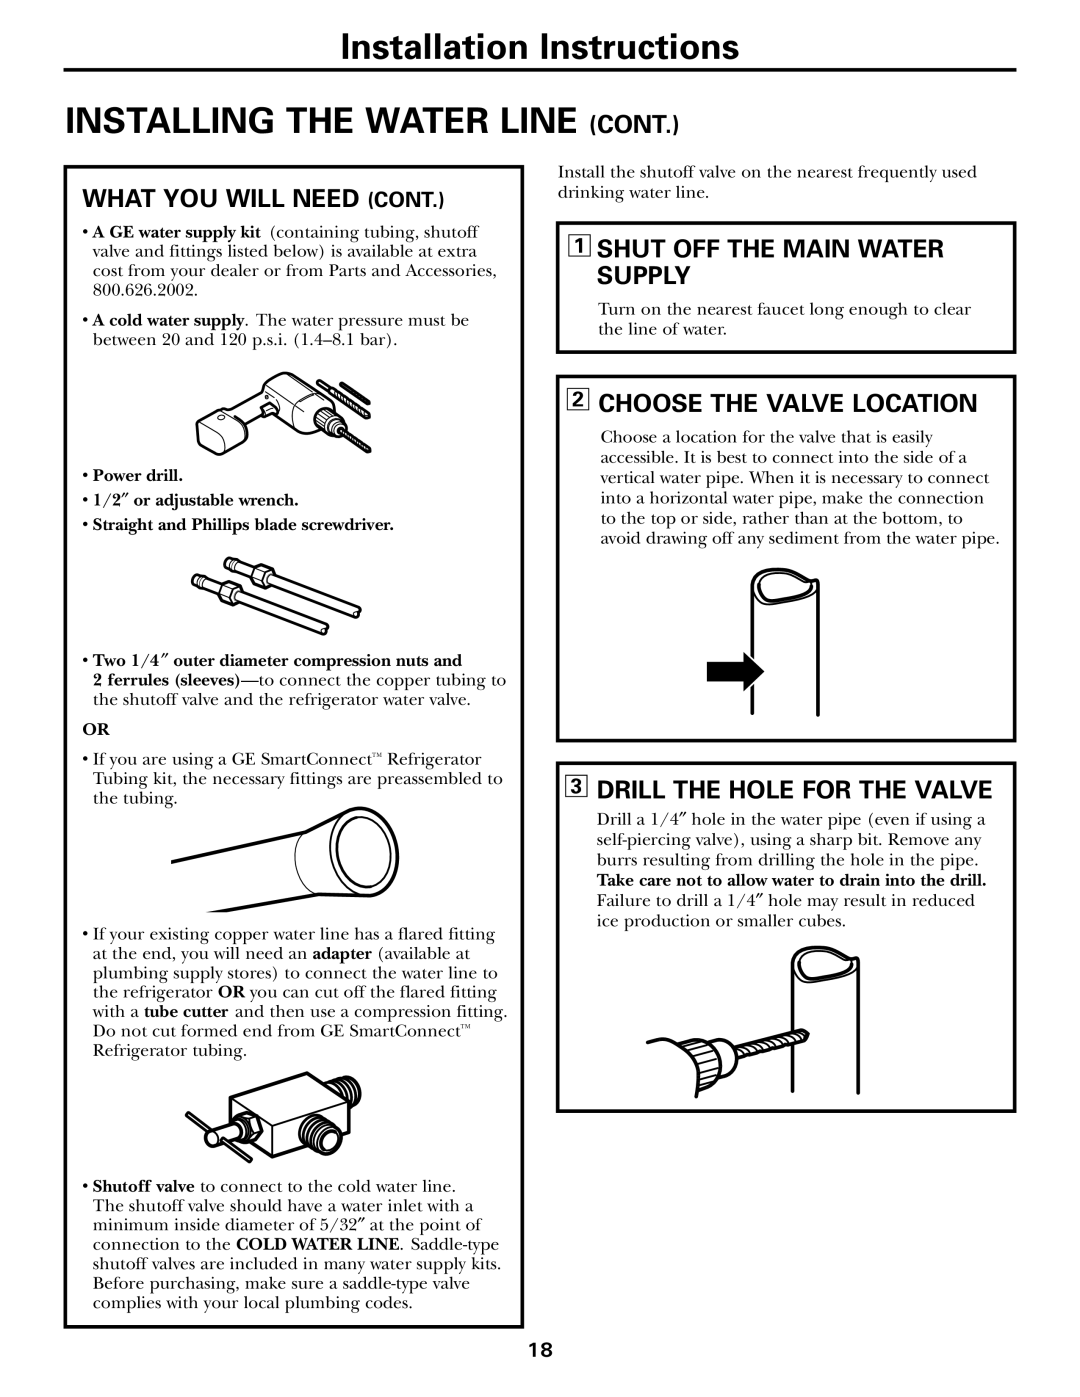 GE GTL21 Installation Instructions INSTALLING THE WATER LINE CONT, What You Will Need Cont, Shut Off The Main Water Supply 